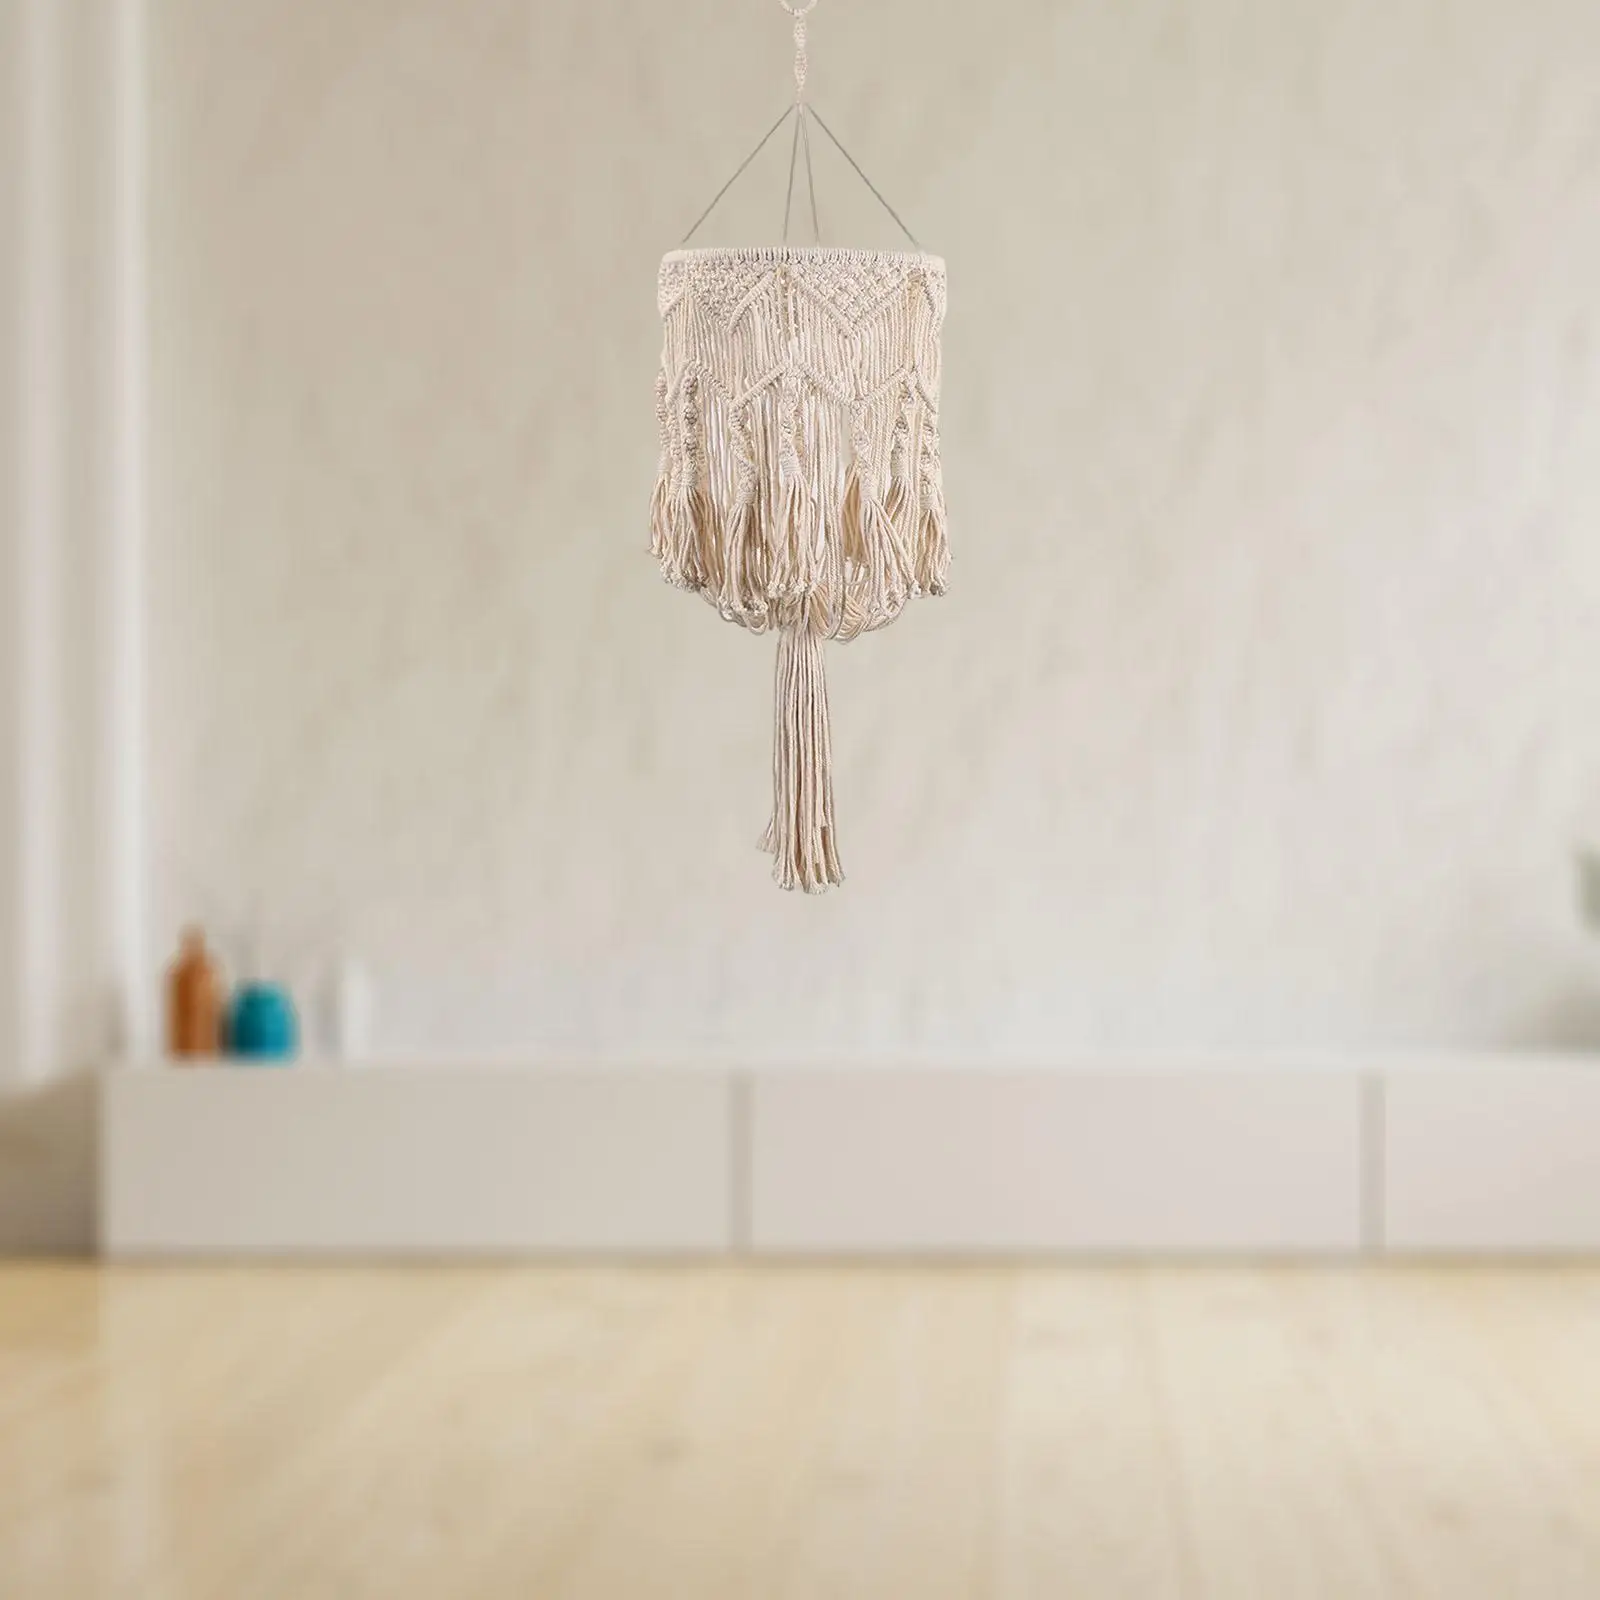 Nordic Macrame Lamp Shade Ceiling Light Cover Boho Handmade Woven Hanging Lampshade for Wedding Party Bedroom Office Decoration